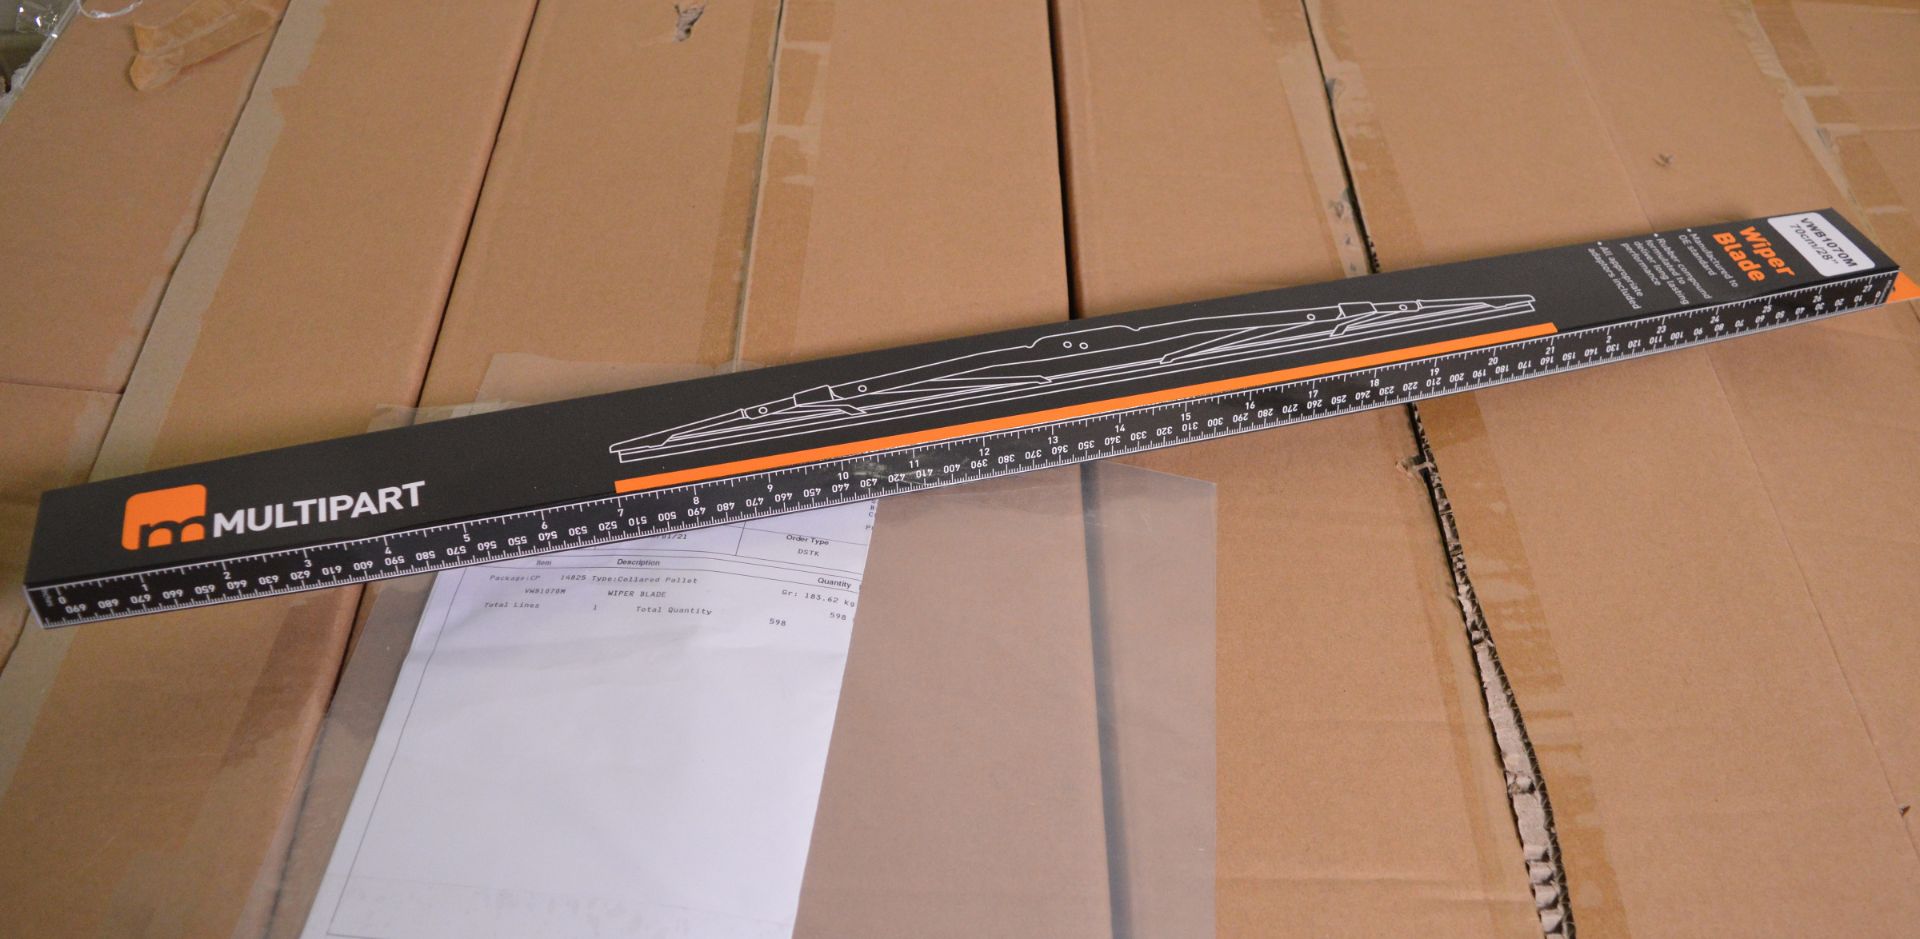 Vehicle parts - wiper blades - see picture for itinerary for model numbers and quantites - - Image 2 of 4